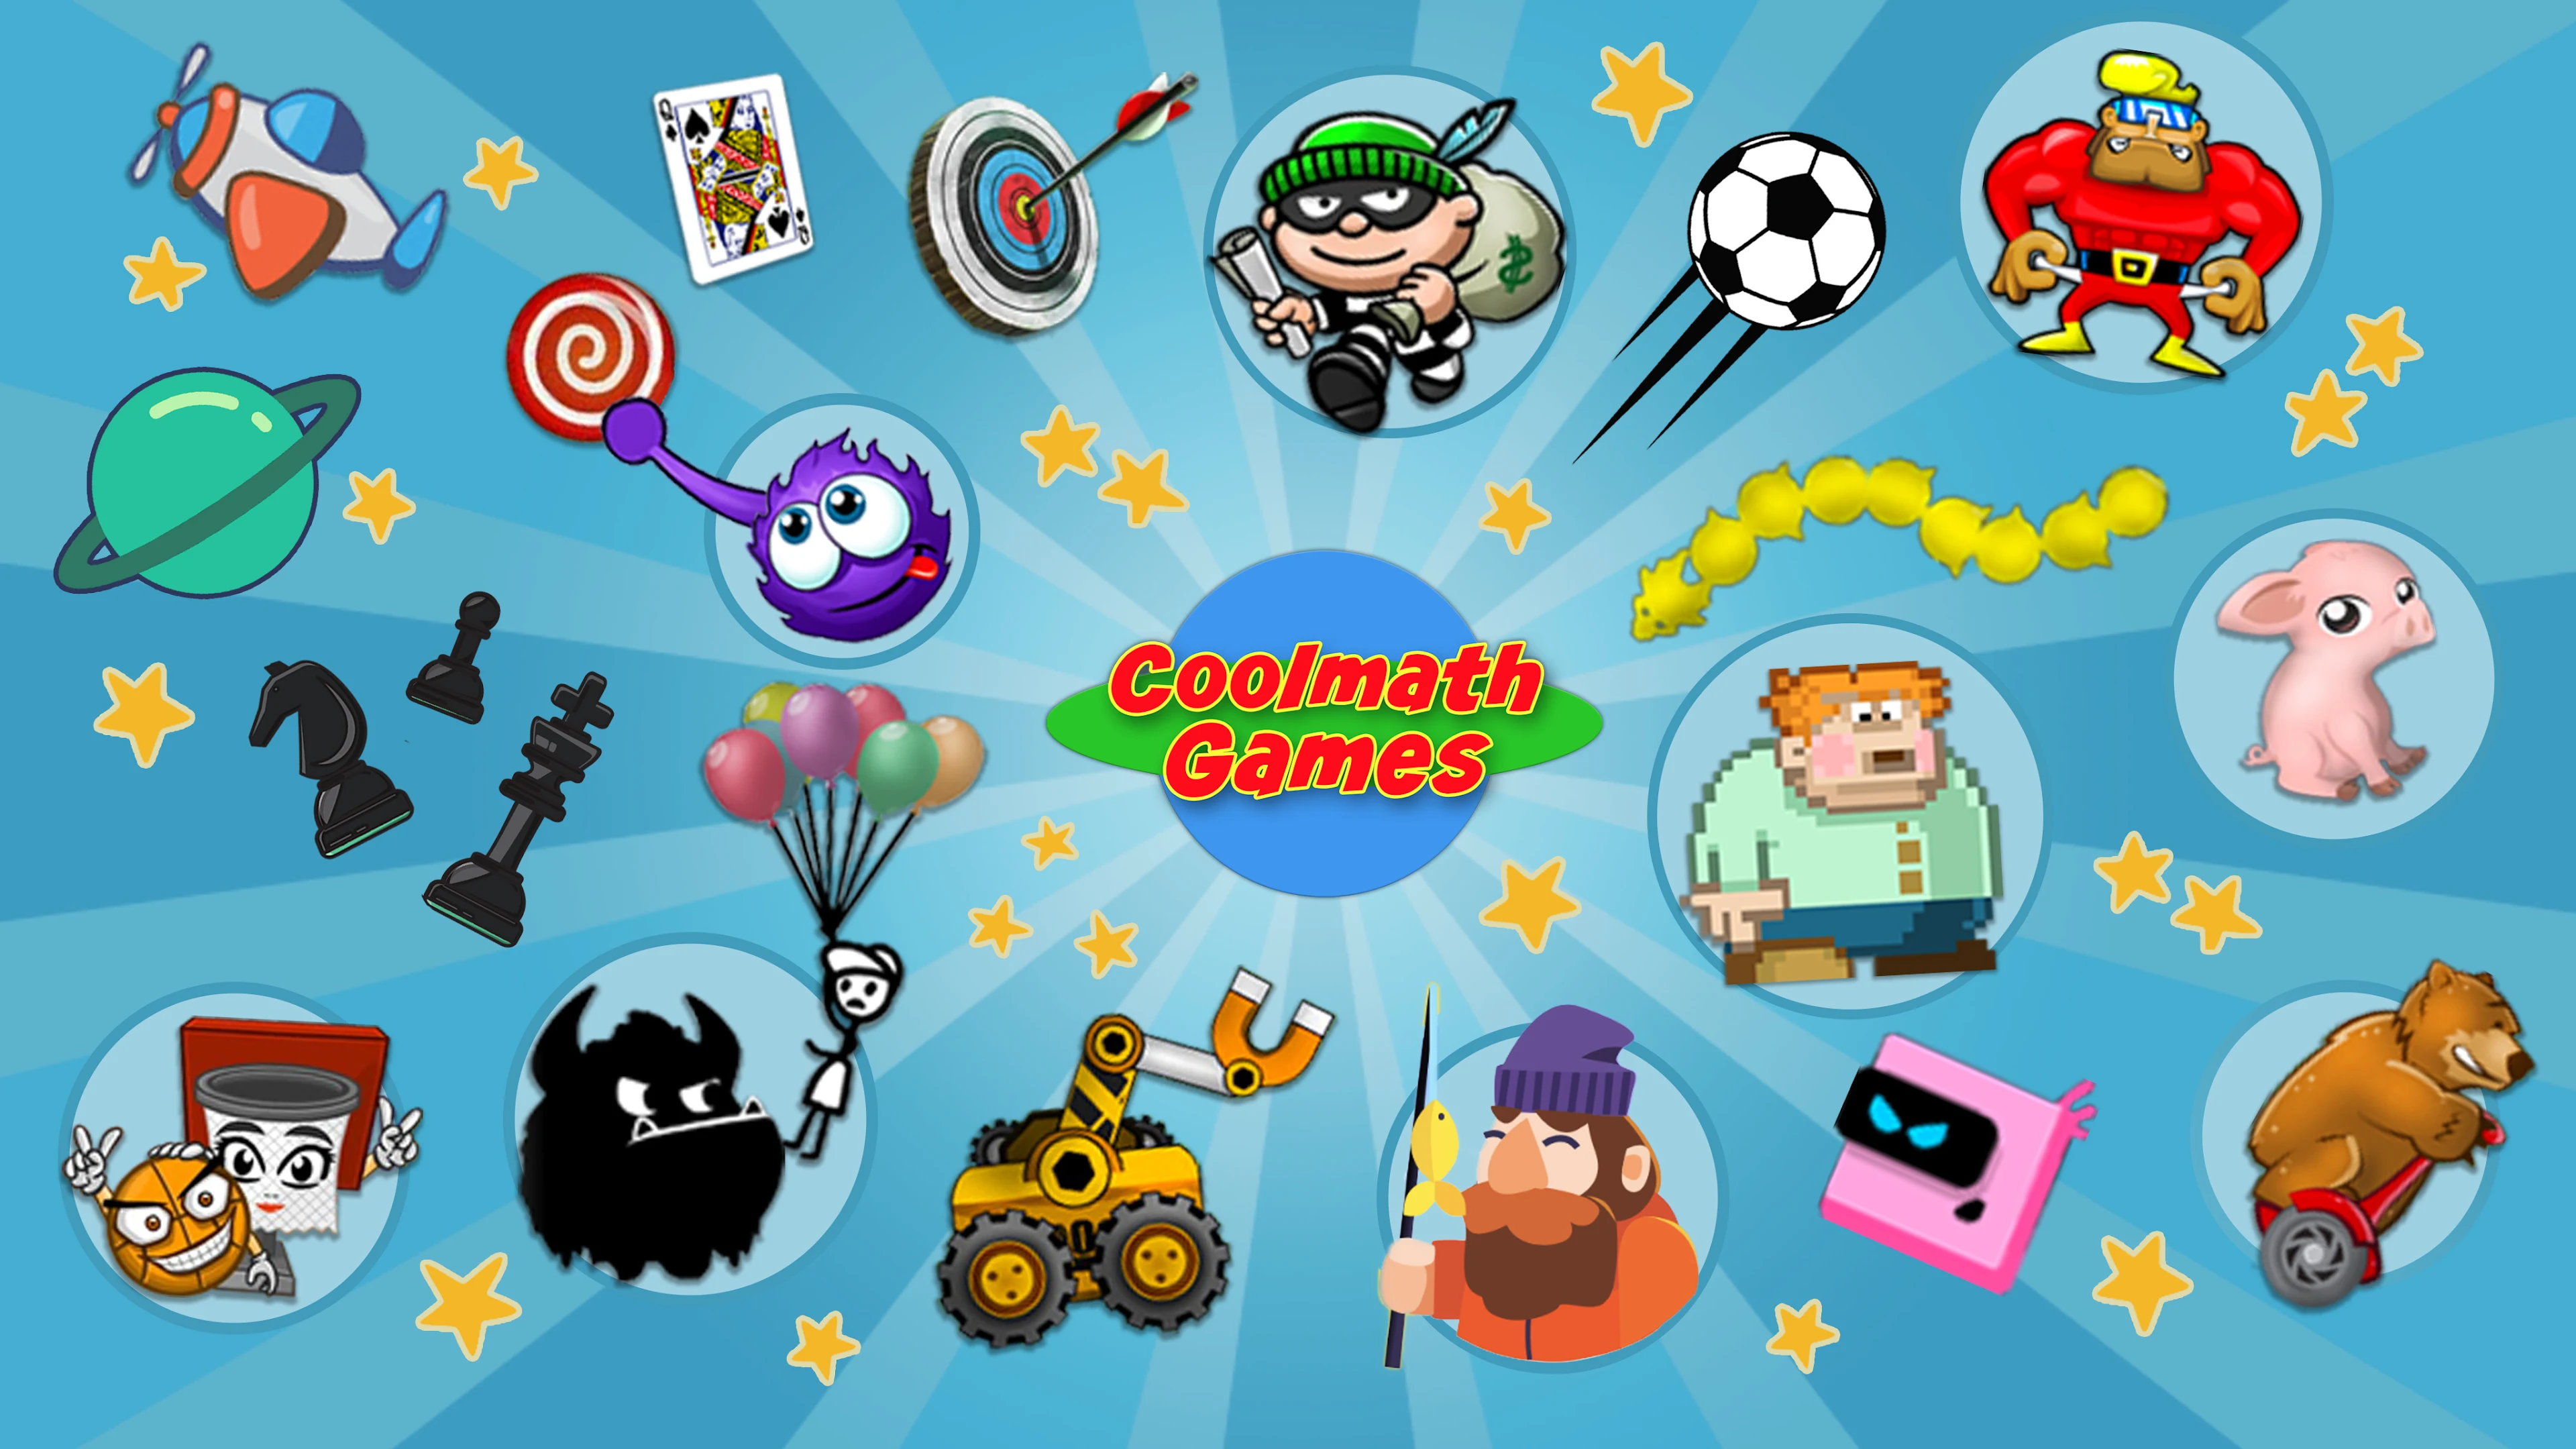 Drawing Games - Play Online at Coolmath Games